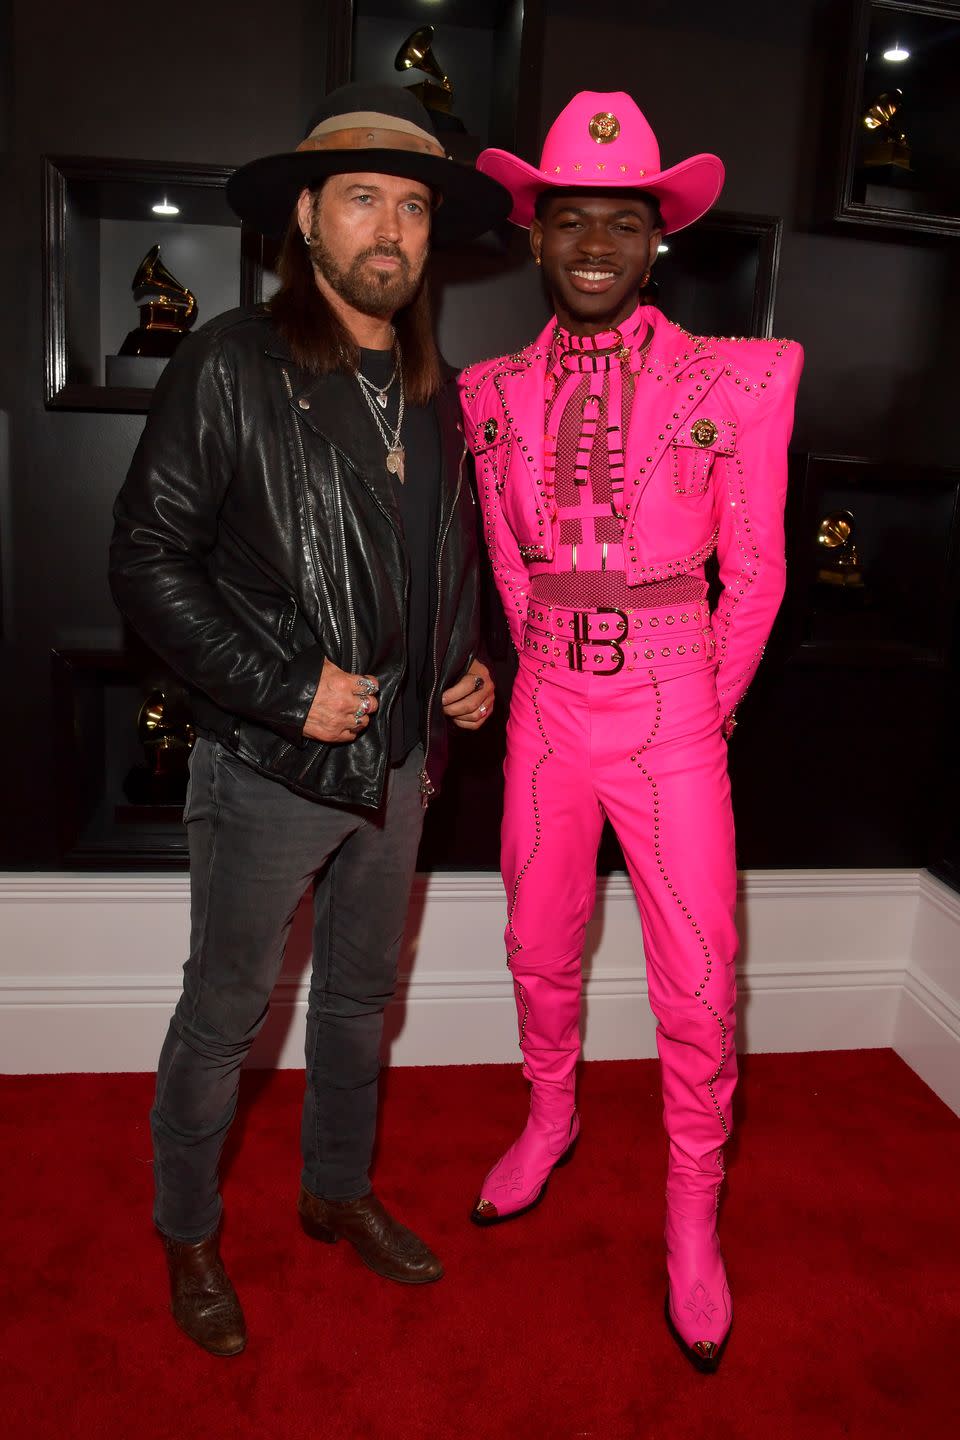 12) Billy Ray Cyrus and Lil Nas X